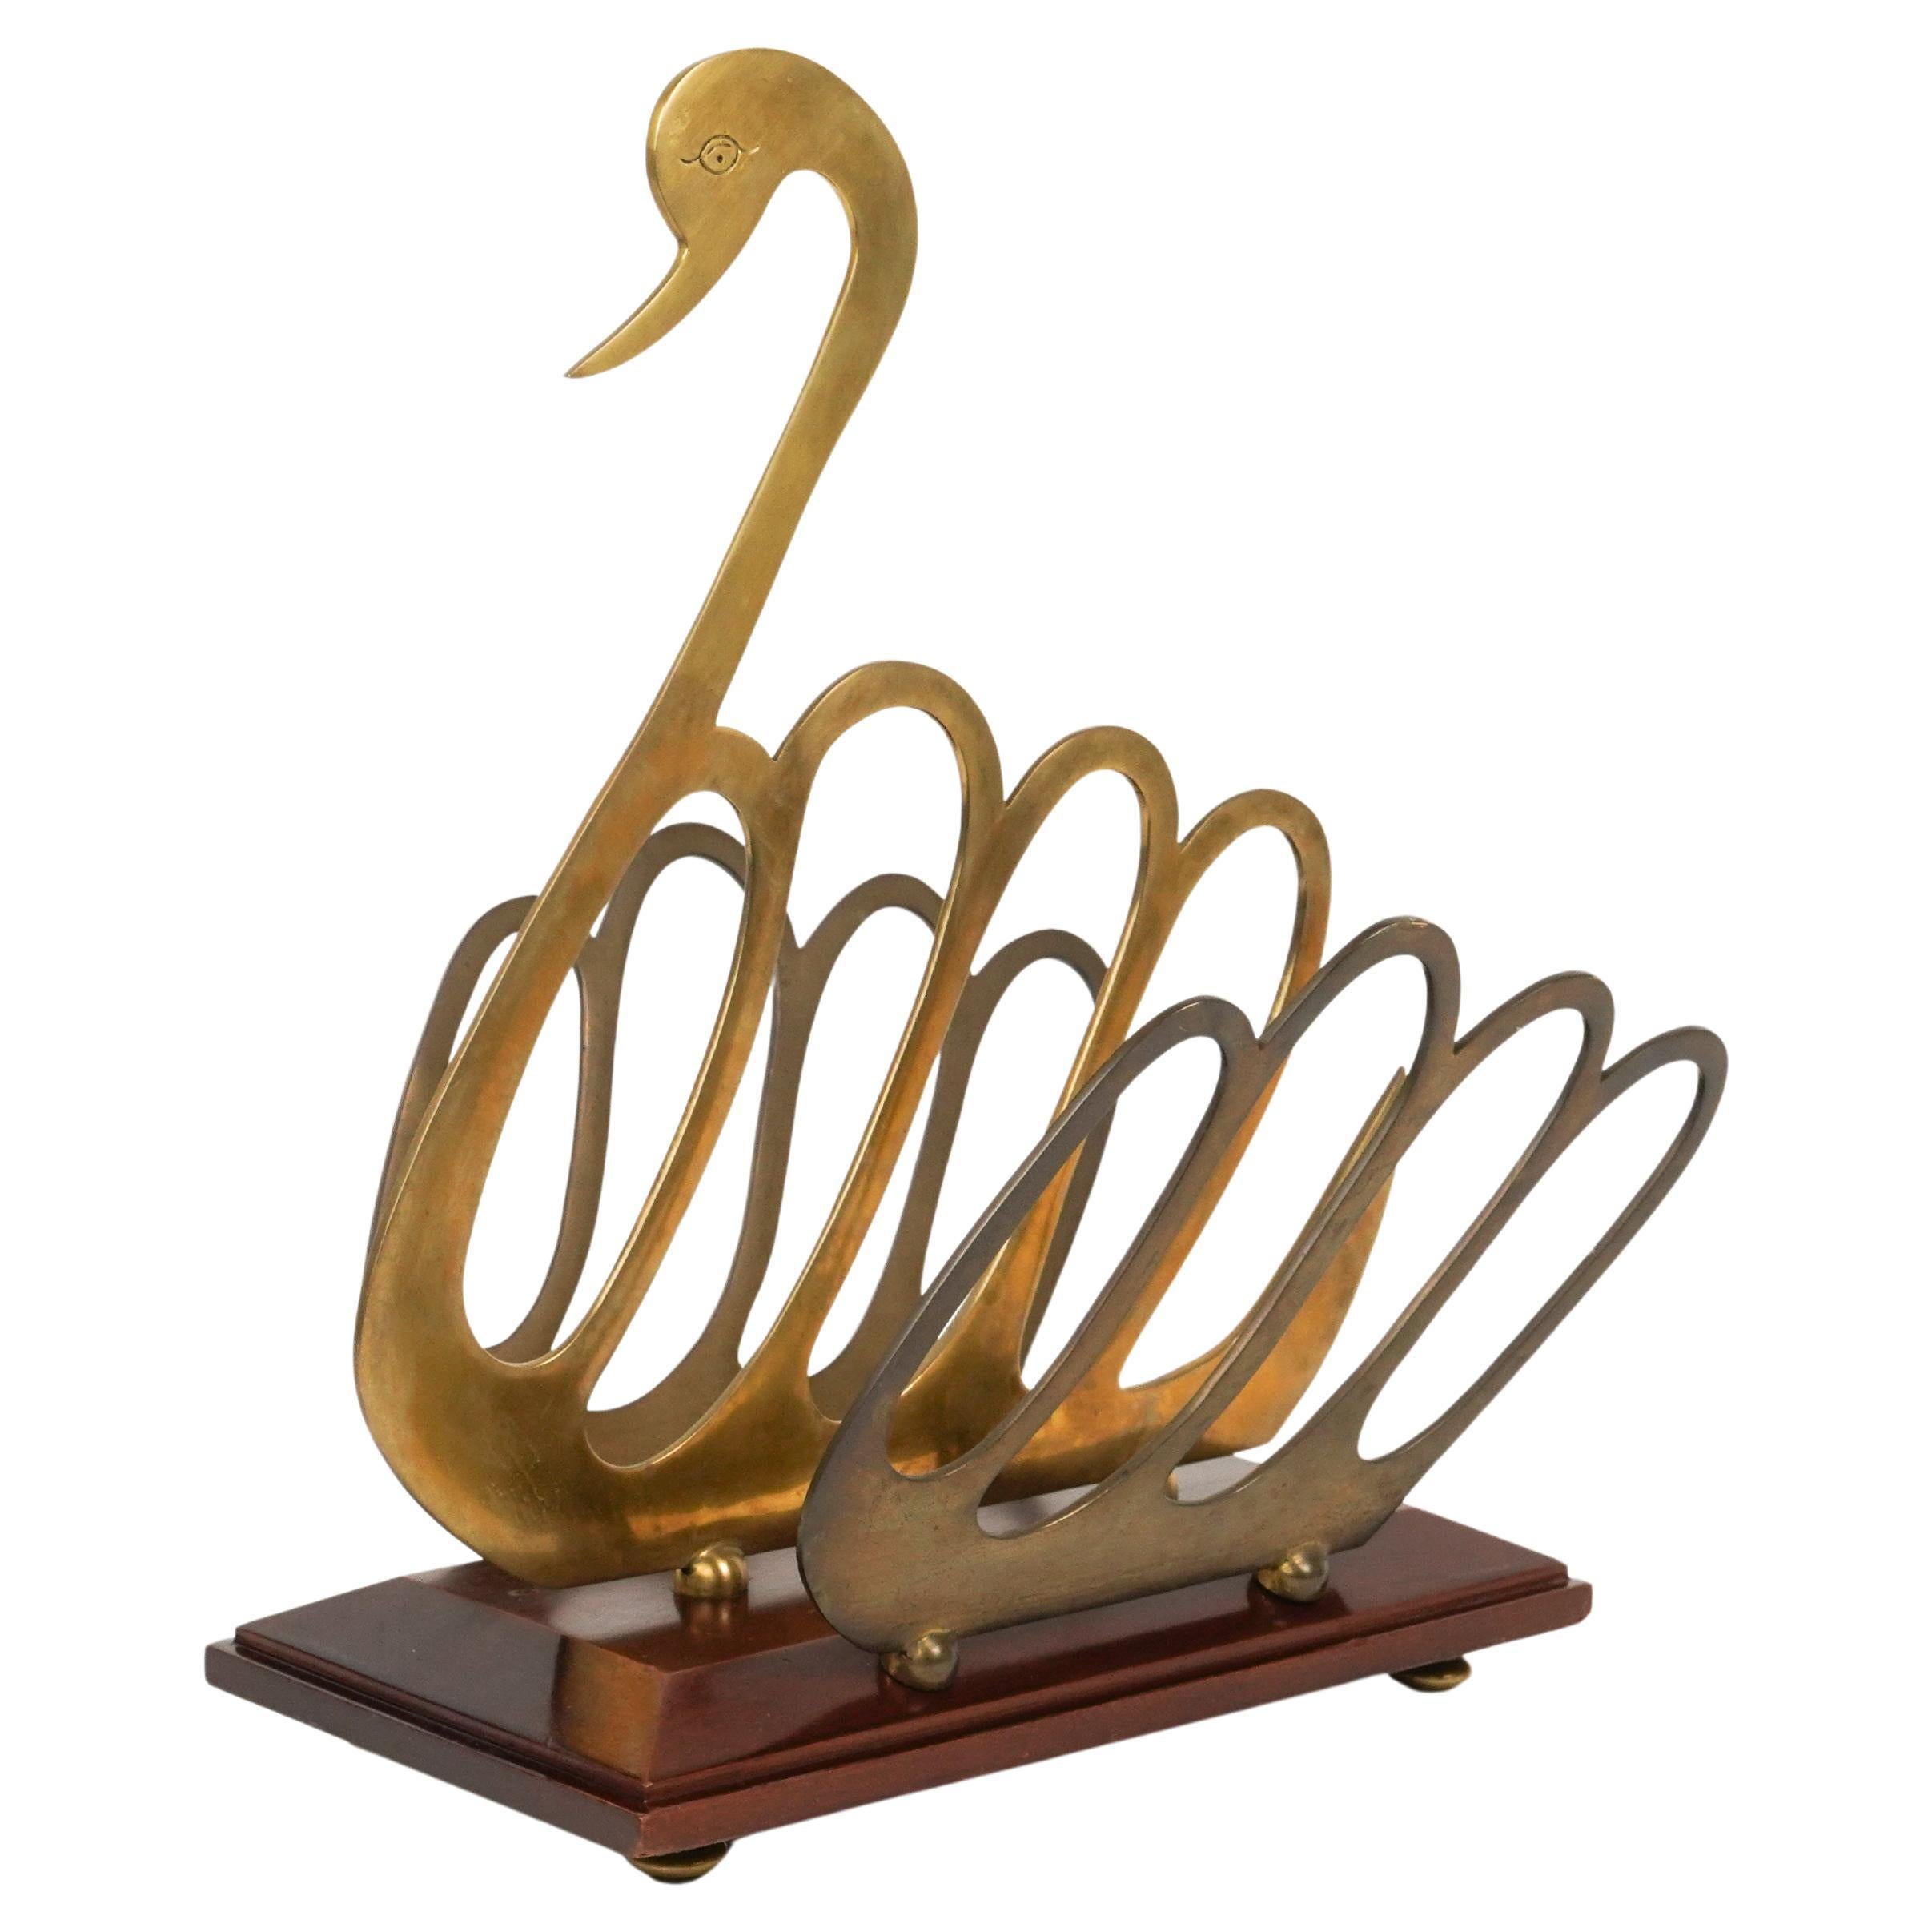 Swan Shaped Magazine Rack in Wood and Brass Maison Jansen Style, Italy 1970s For Sale